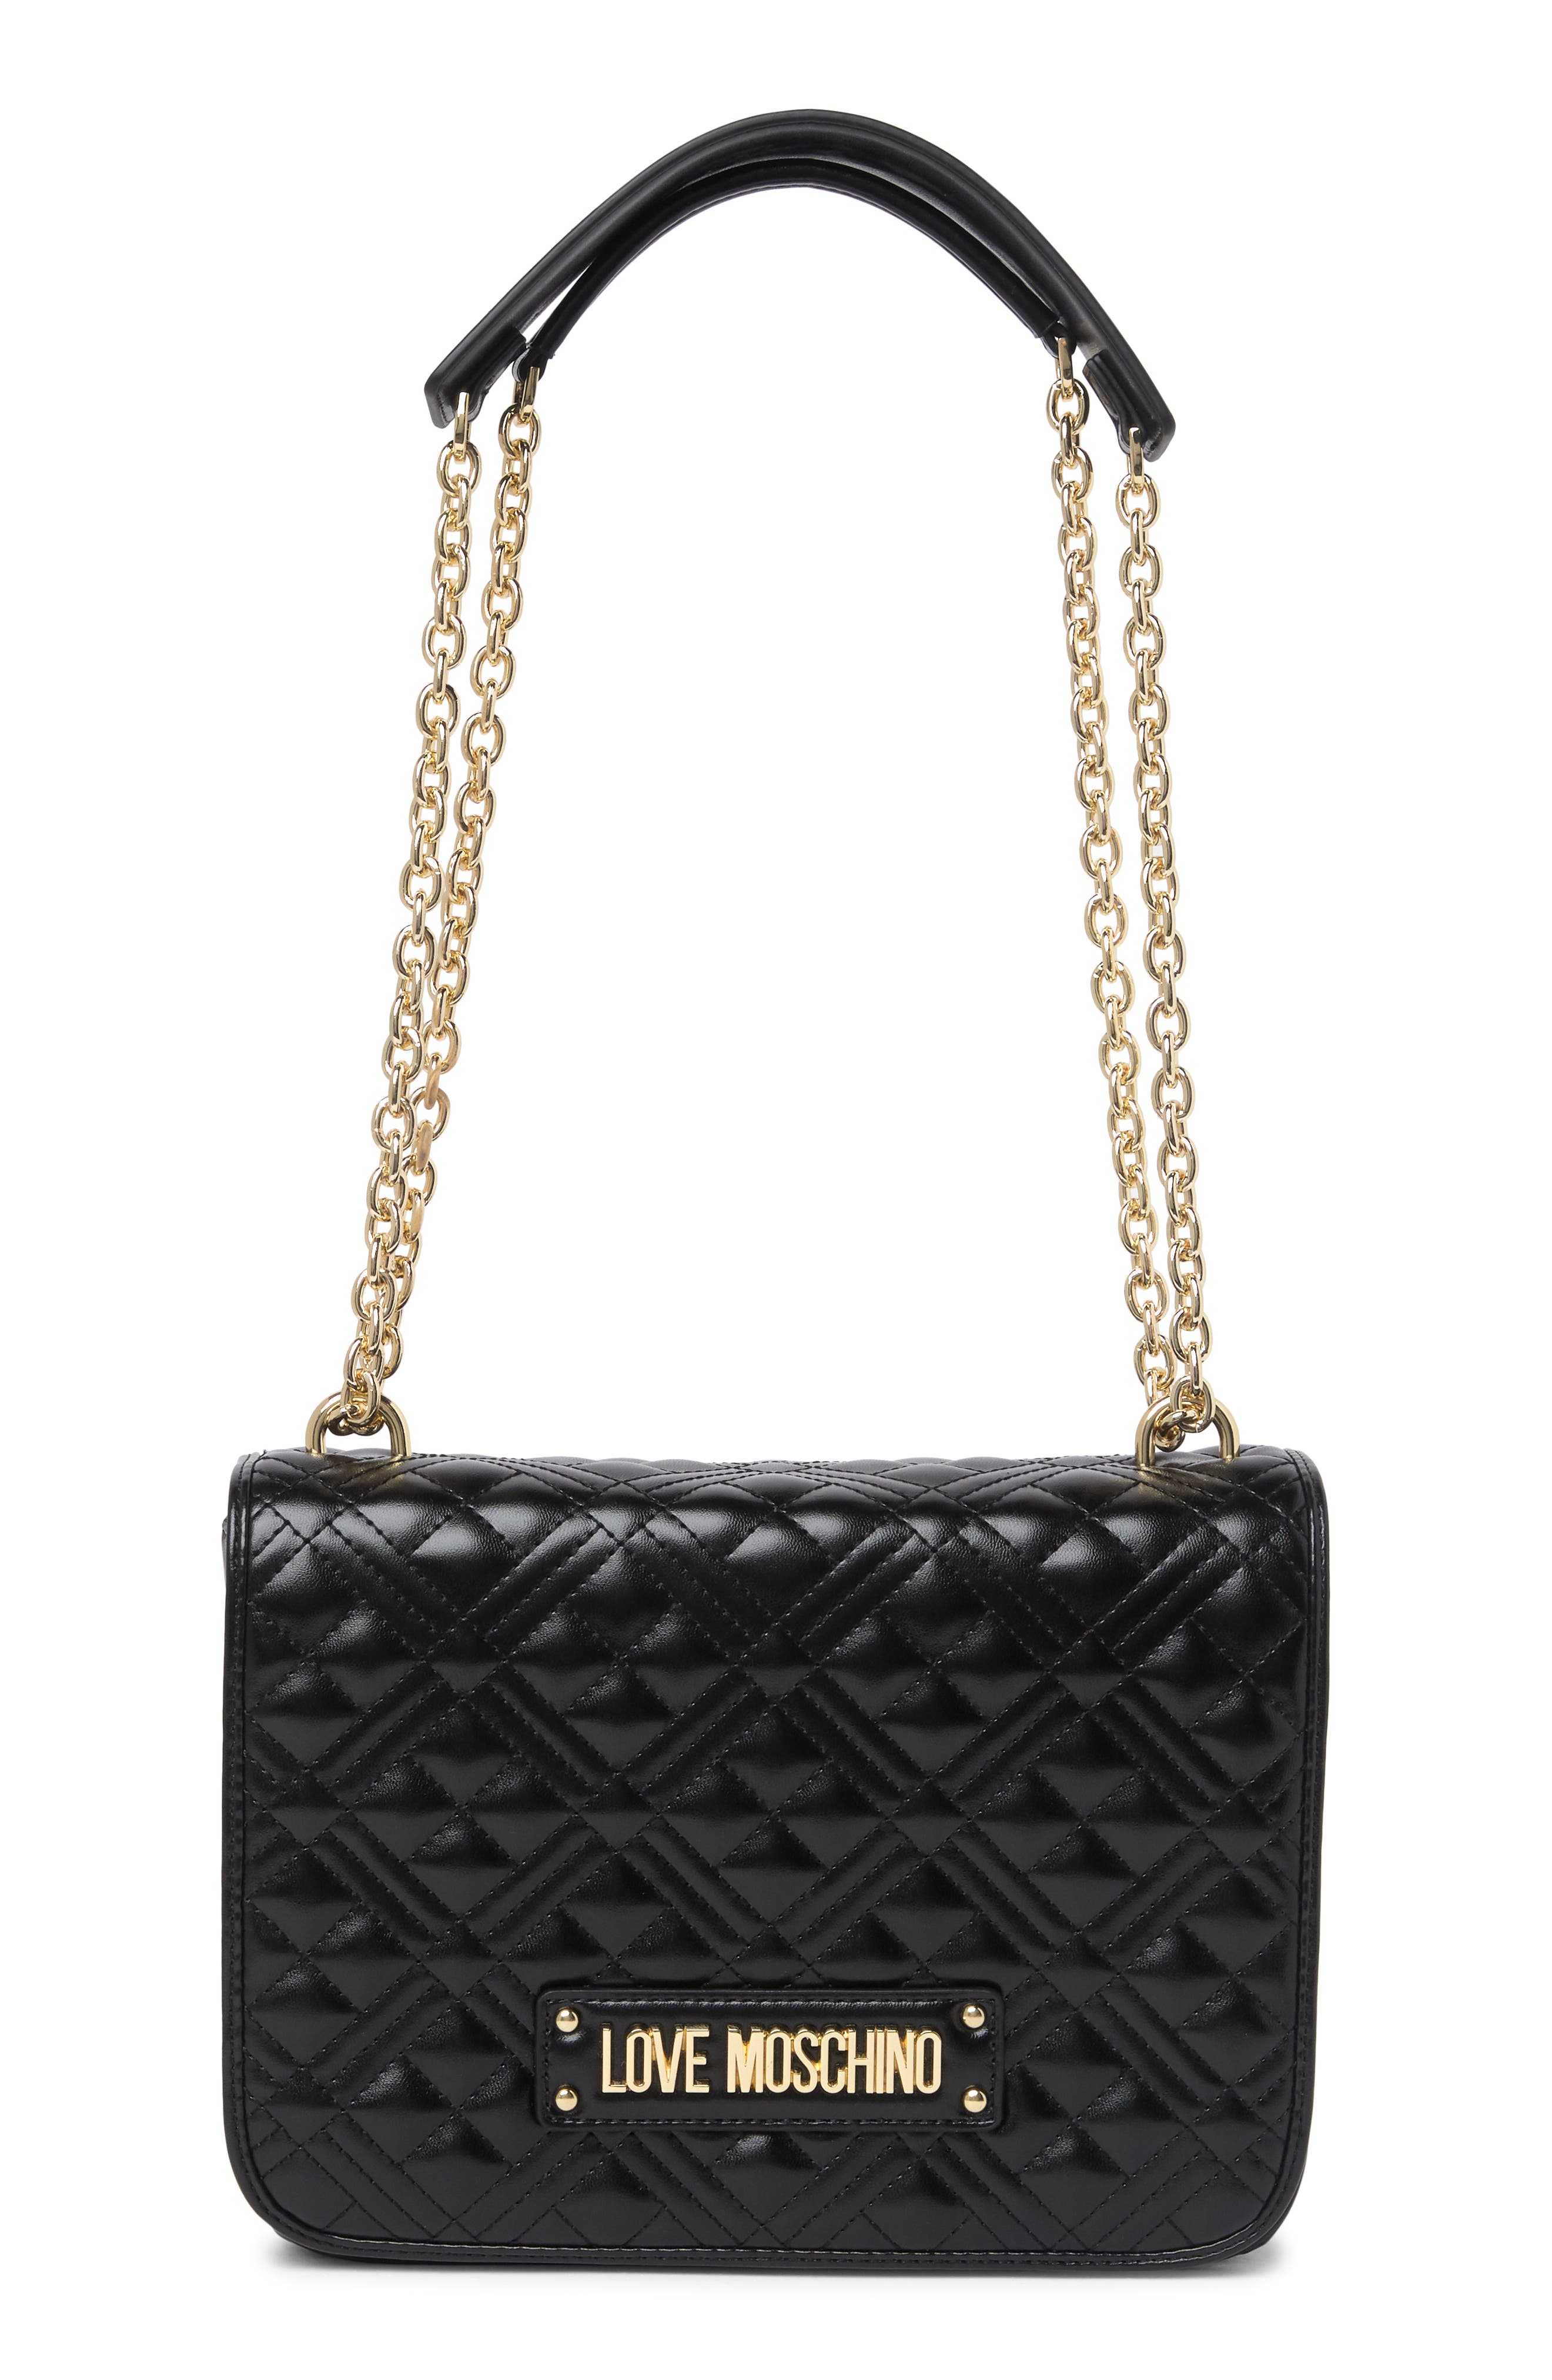 love moschino bags review